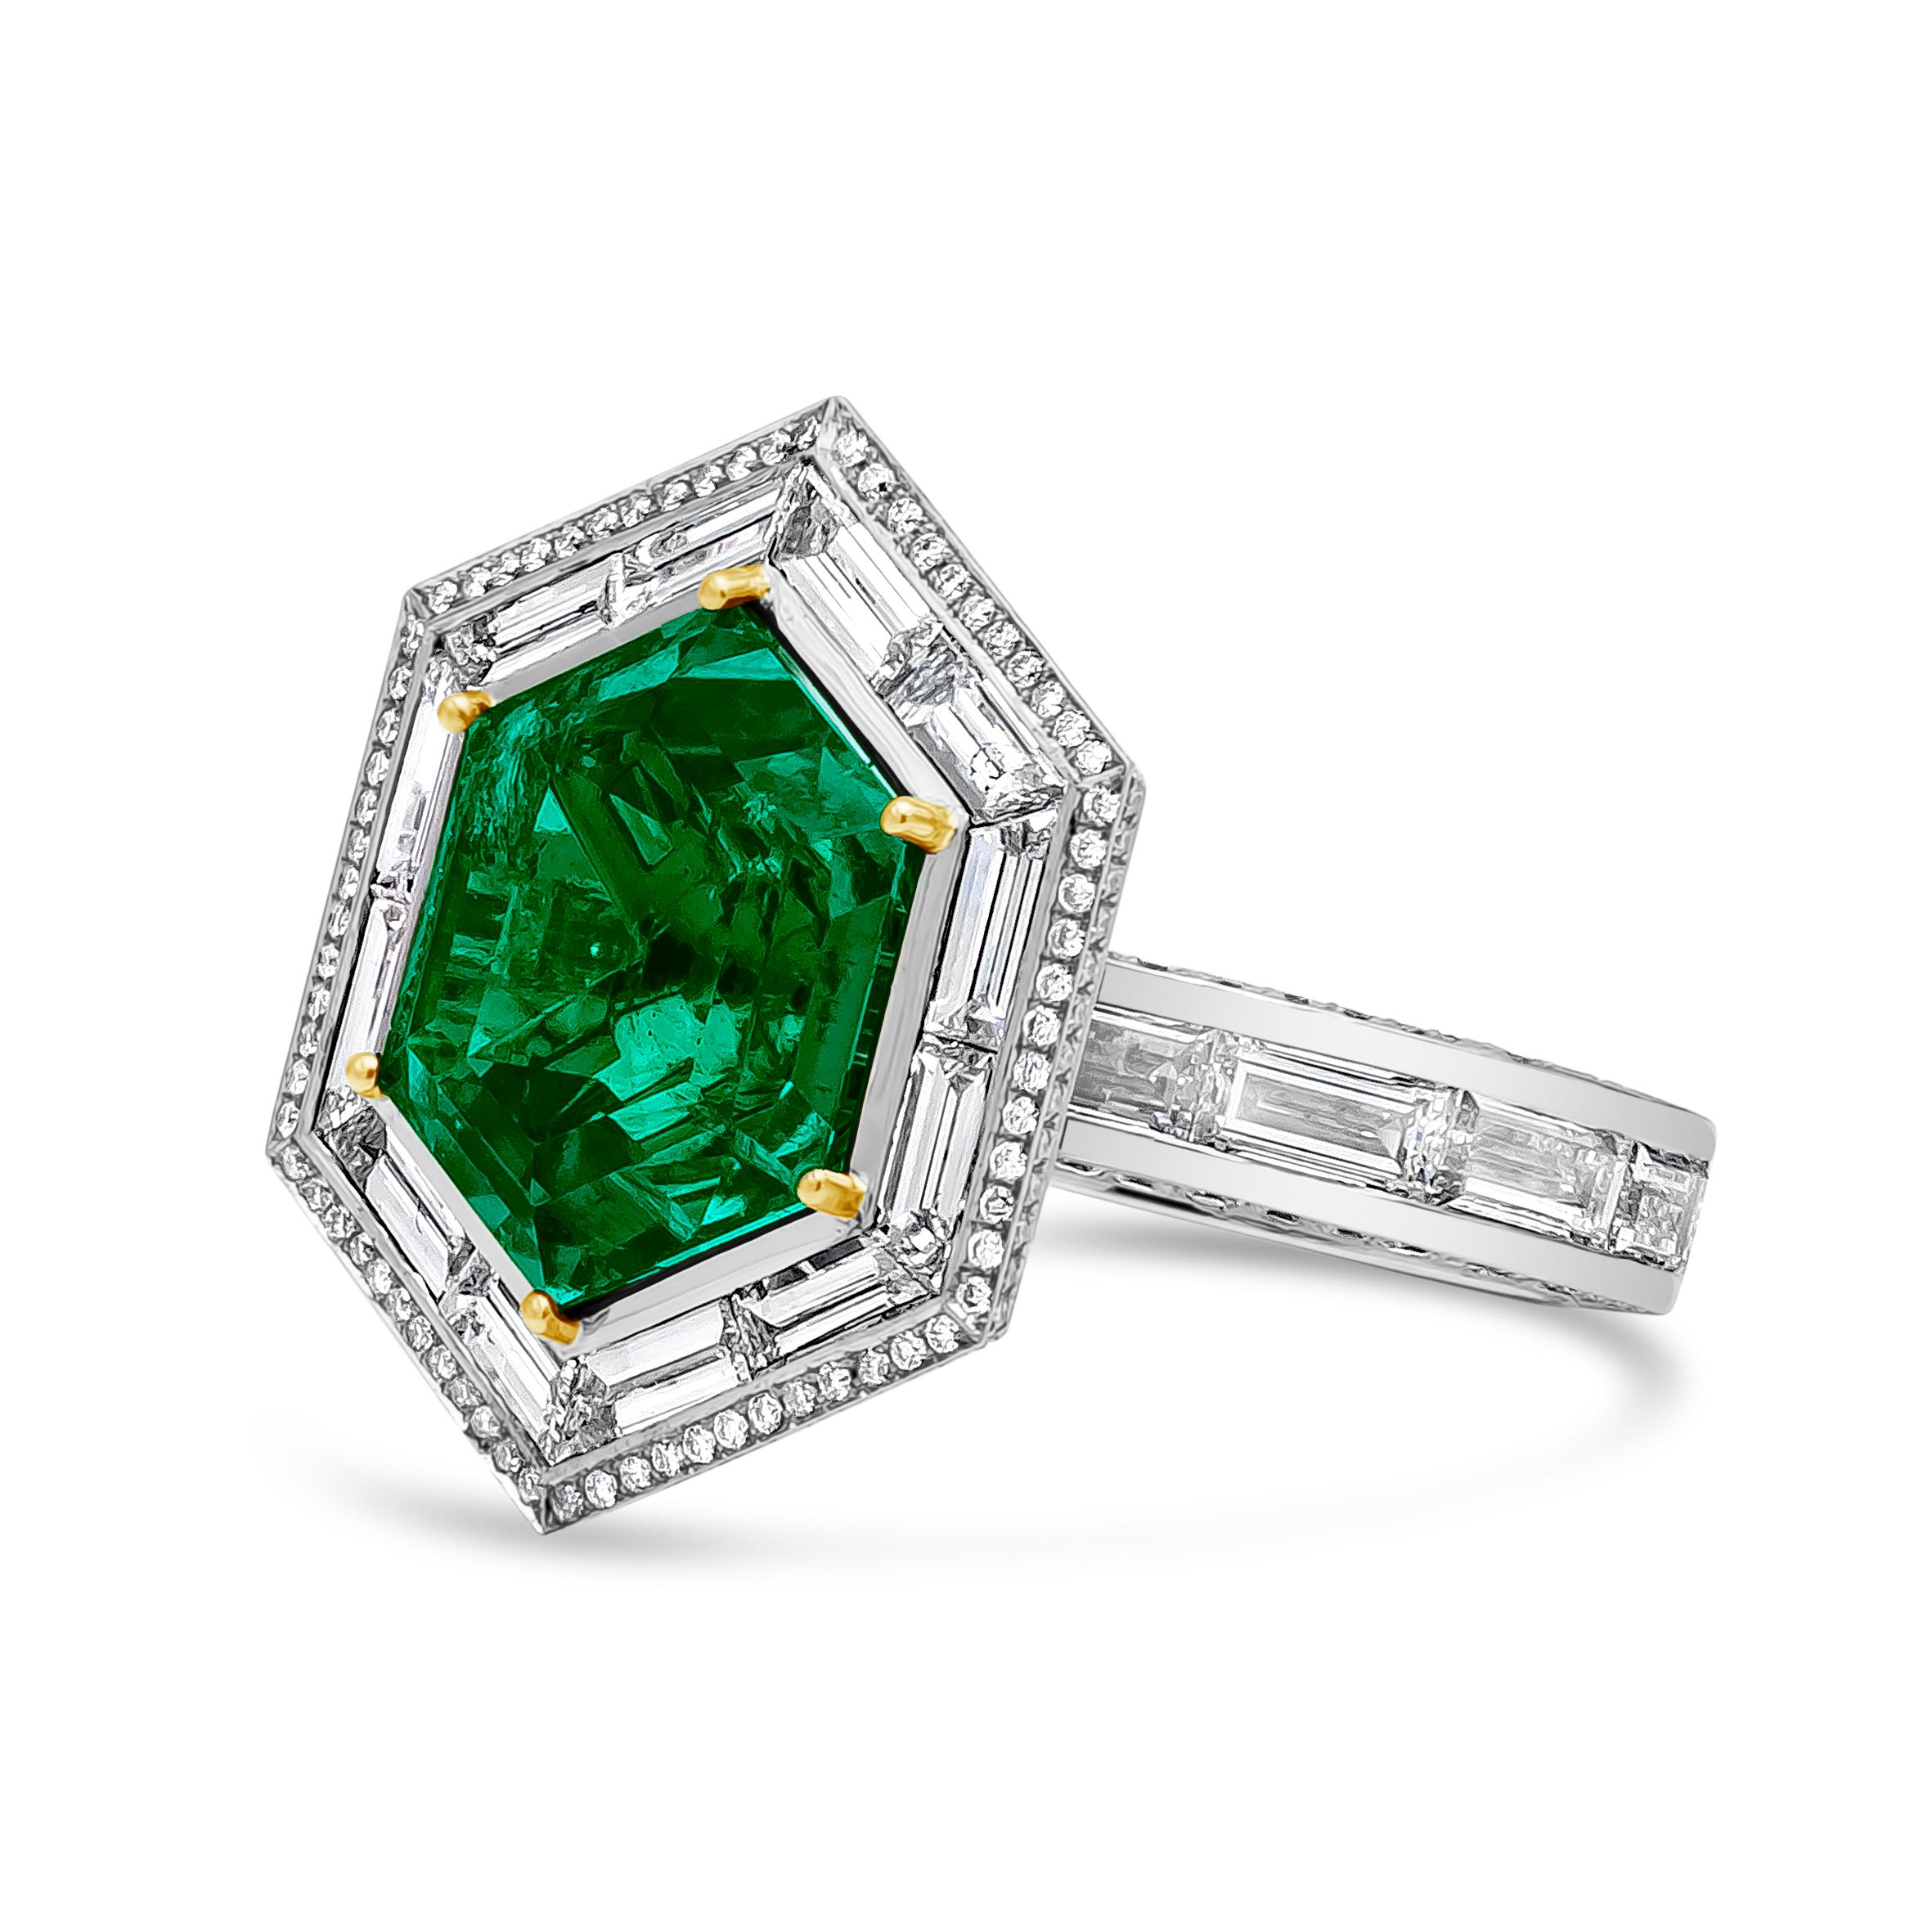 This elegant and well crafted high end jewelry fashion ring features 9.28 carat hexagon cut green emerald center stone surrounded by 12 pieces baguette cut diamonds and 72 brilliant round diamonds. 16 baguette cut diamonds are in the bottom of the